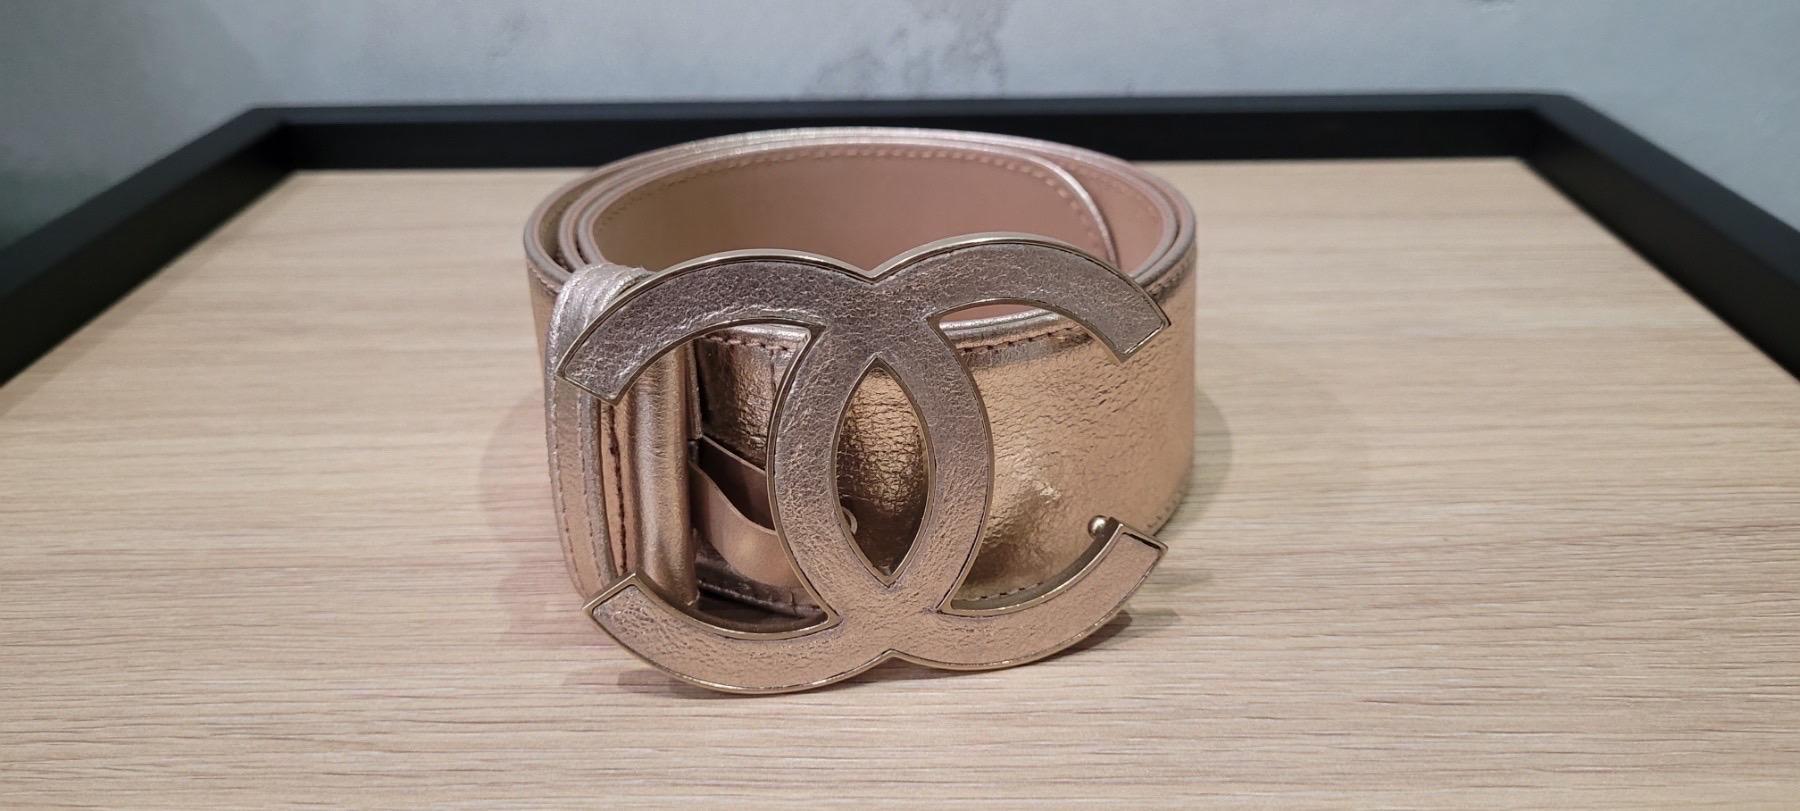 Chanel Rose Gold Metallic CC Buckle Belt Size 80/32 In Excellent Condition For Sale In Krakow, PL